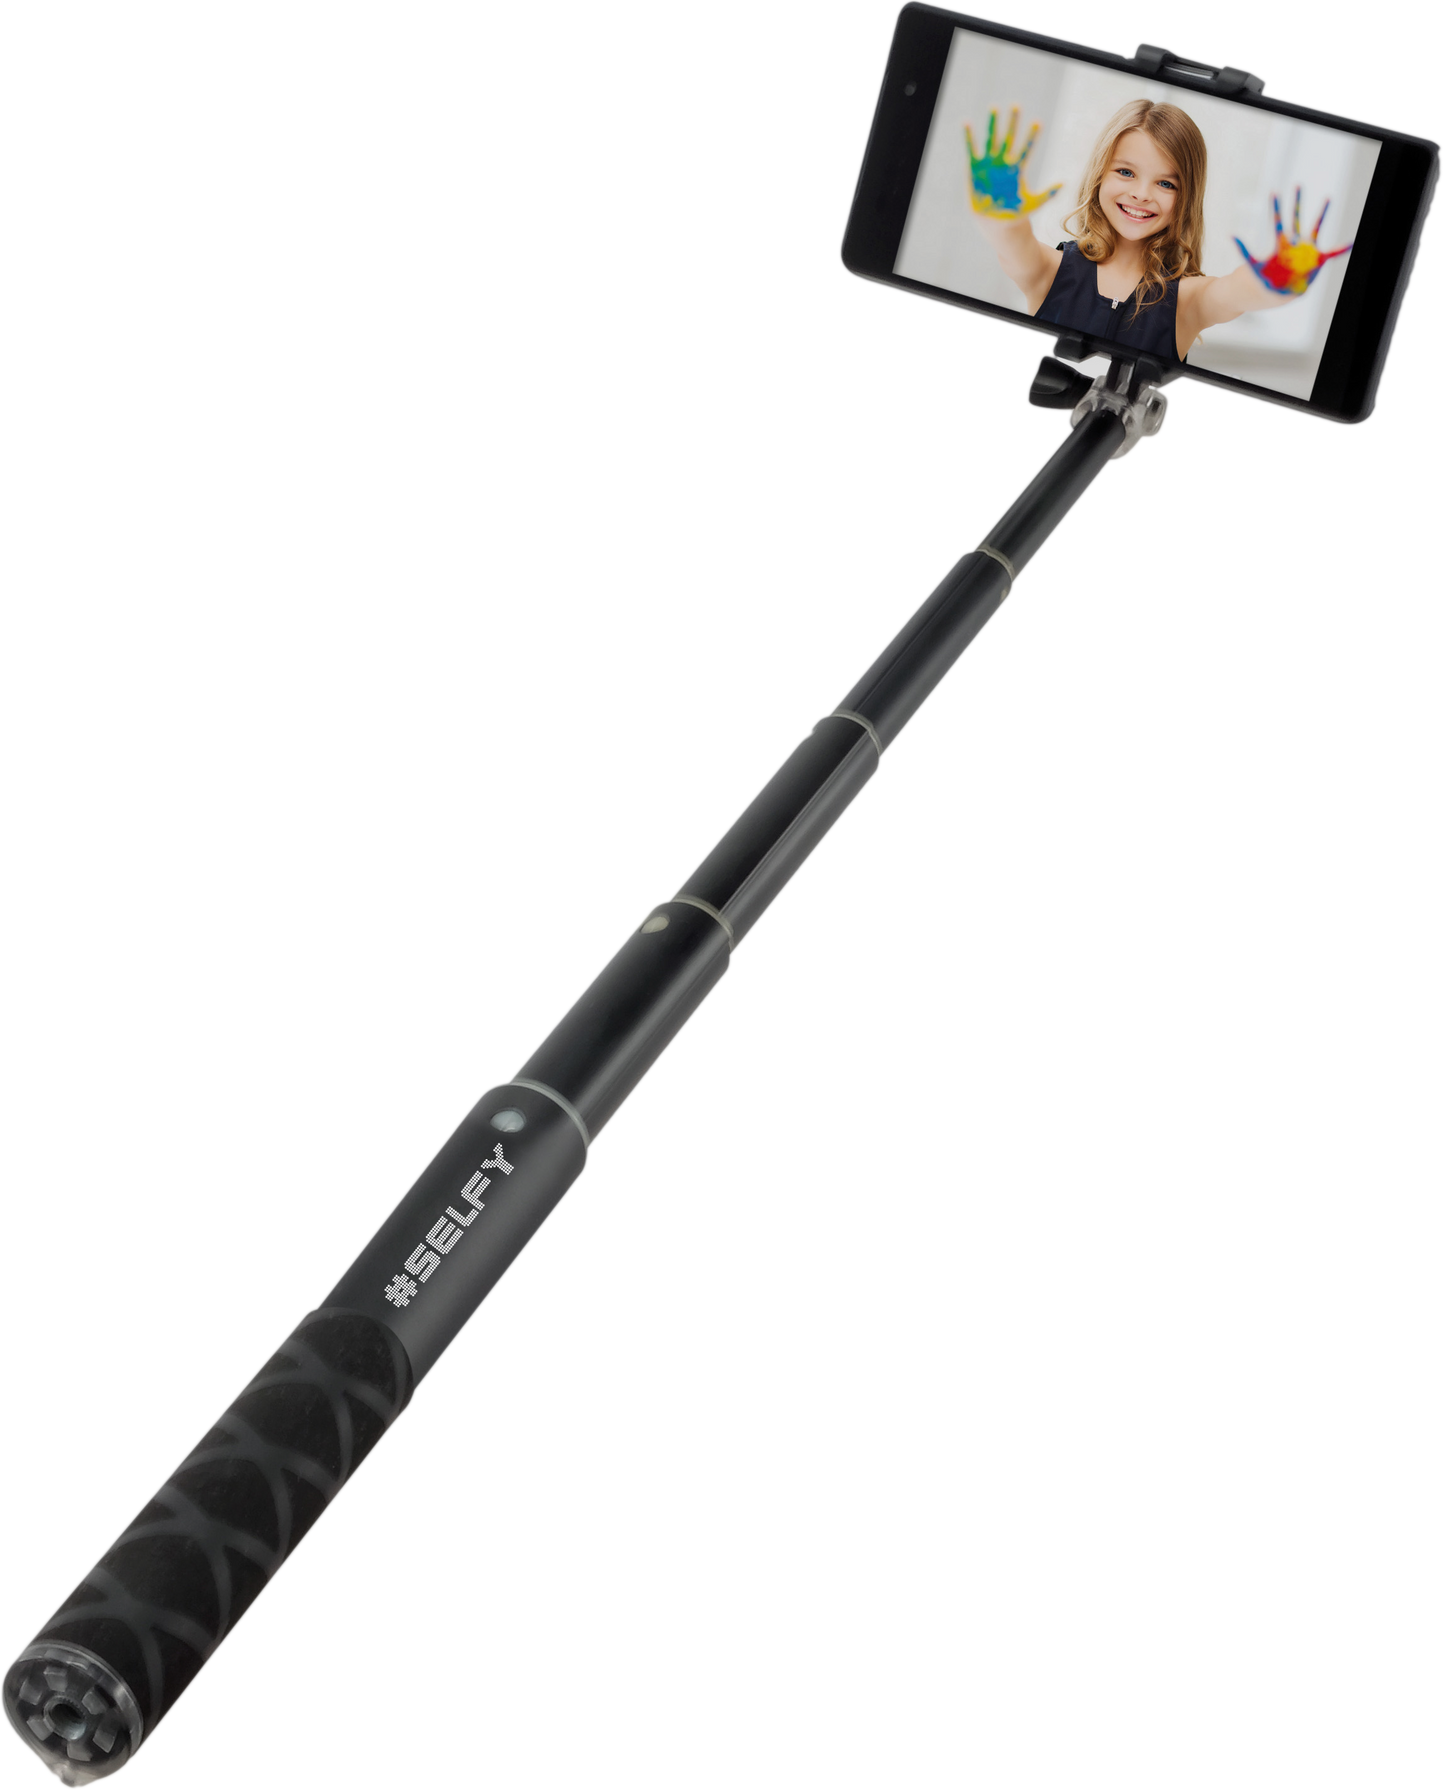 iVoltaa Smile Selfy Stick Aluminium Bluetooth Selfie Kit for iPhone & Android with Carry Bag - Mars Red